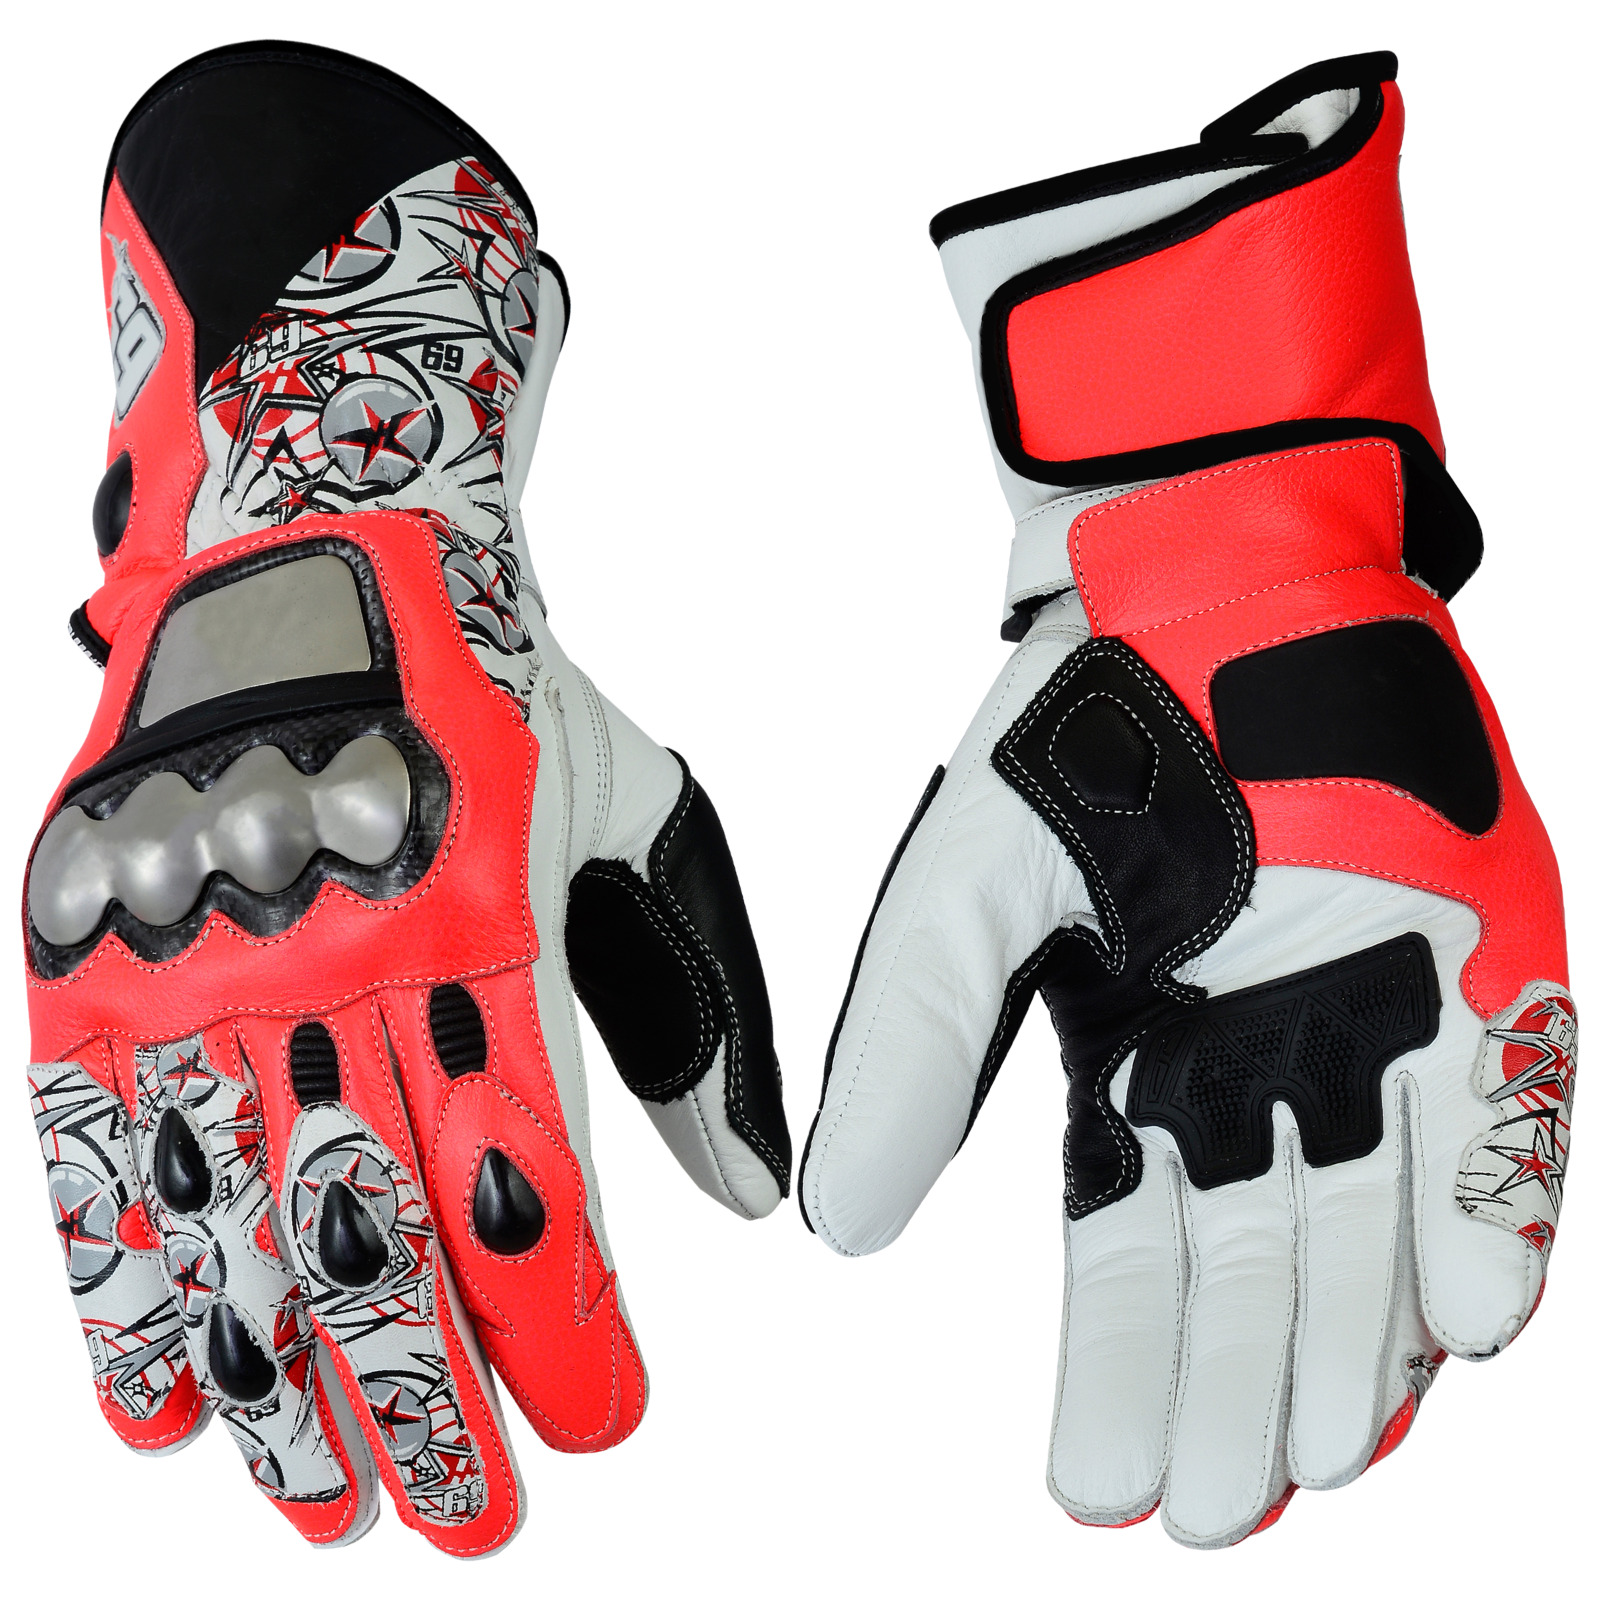 Nicky Hayden Motorcycle Racing Leathers Gloves